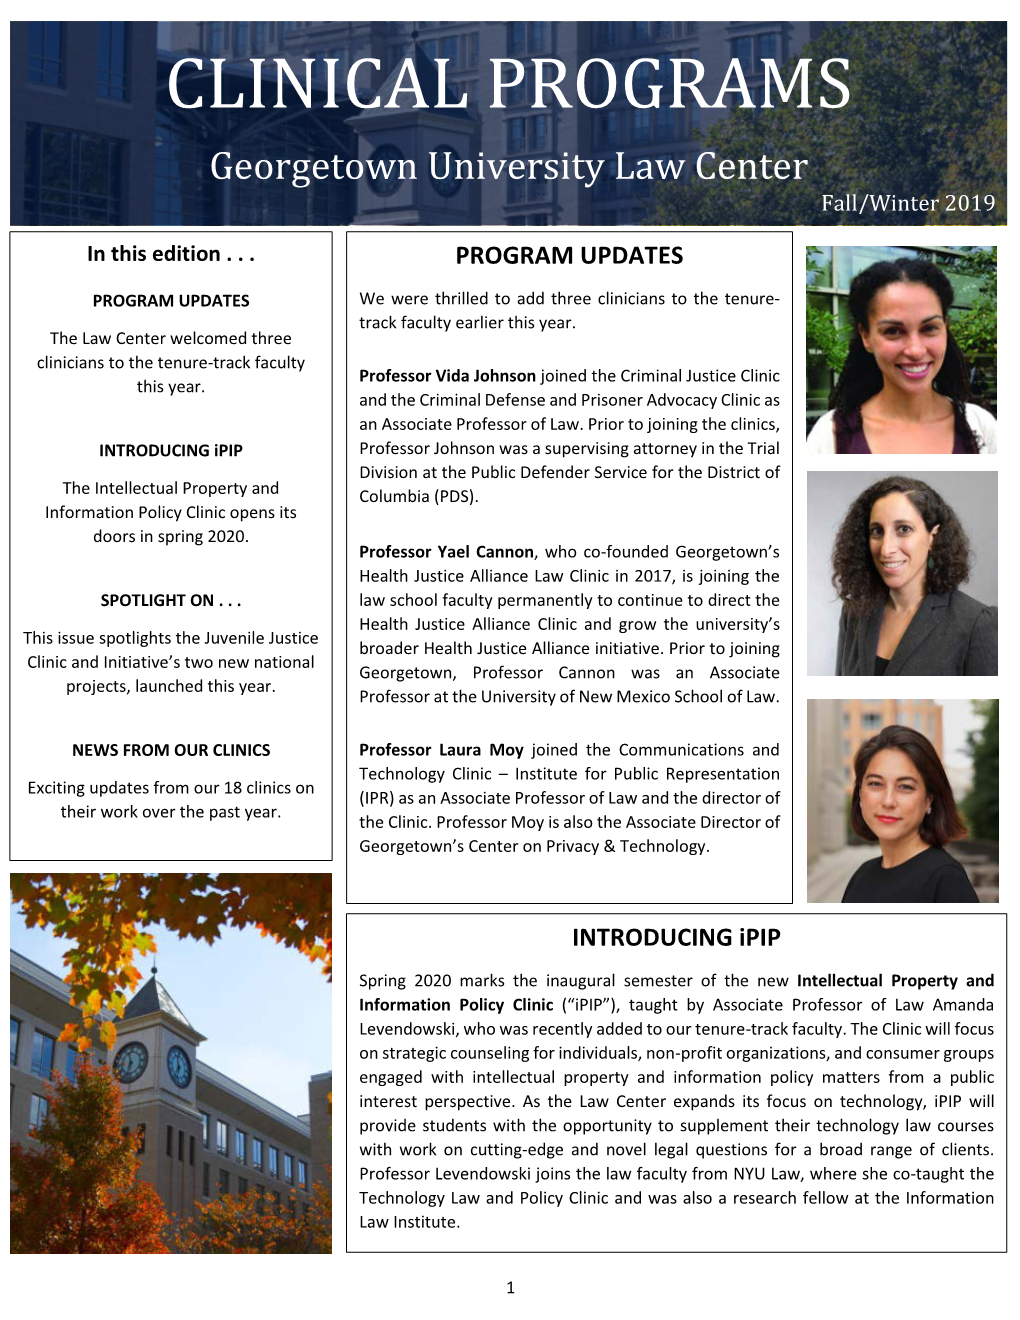 CLINICAL PROGRAMS Georgetown University Law Center Fall/Winter 2019